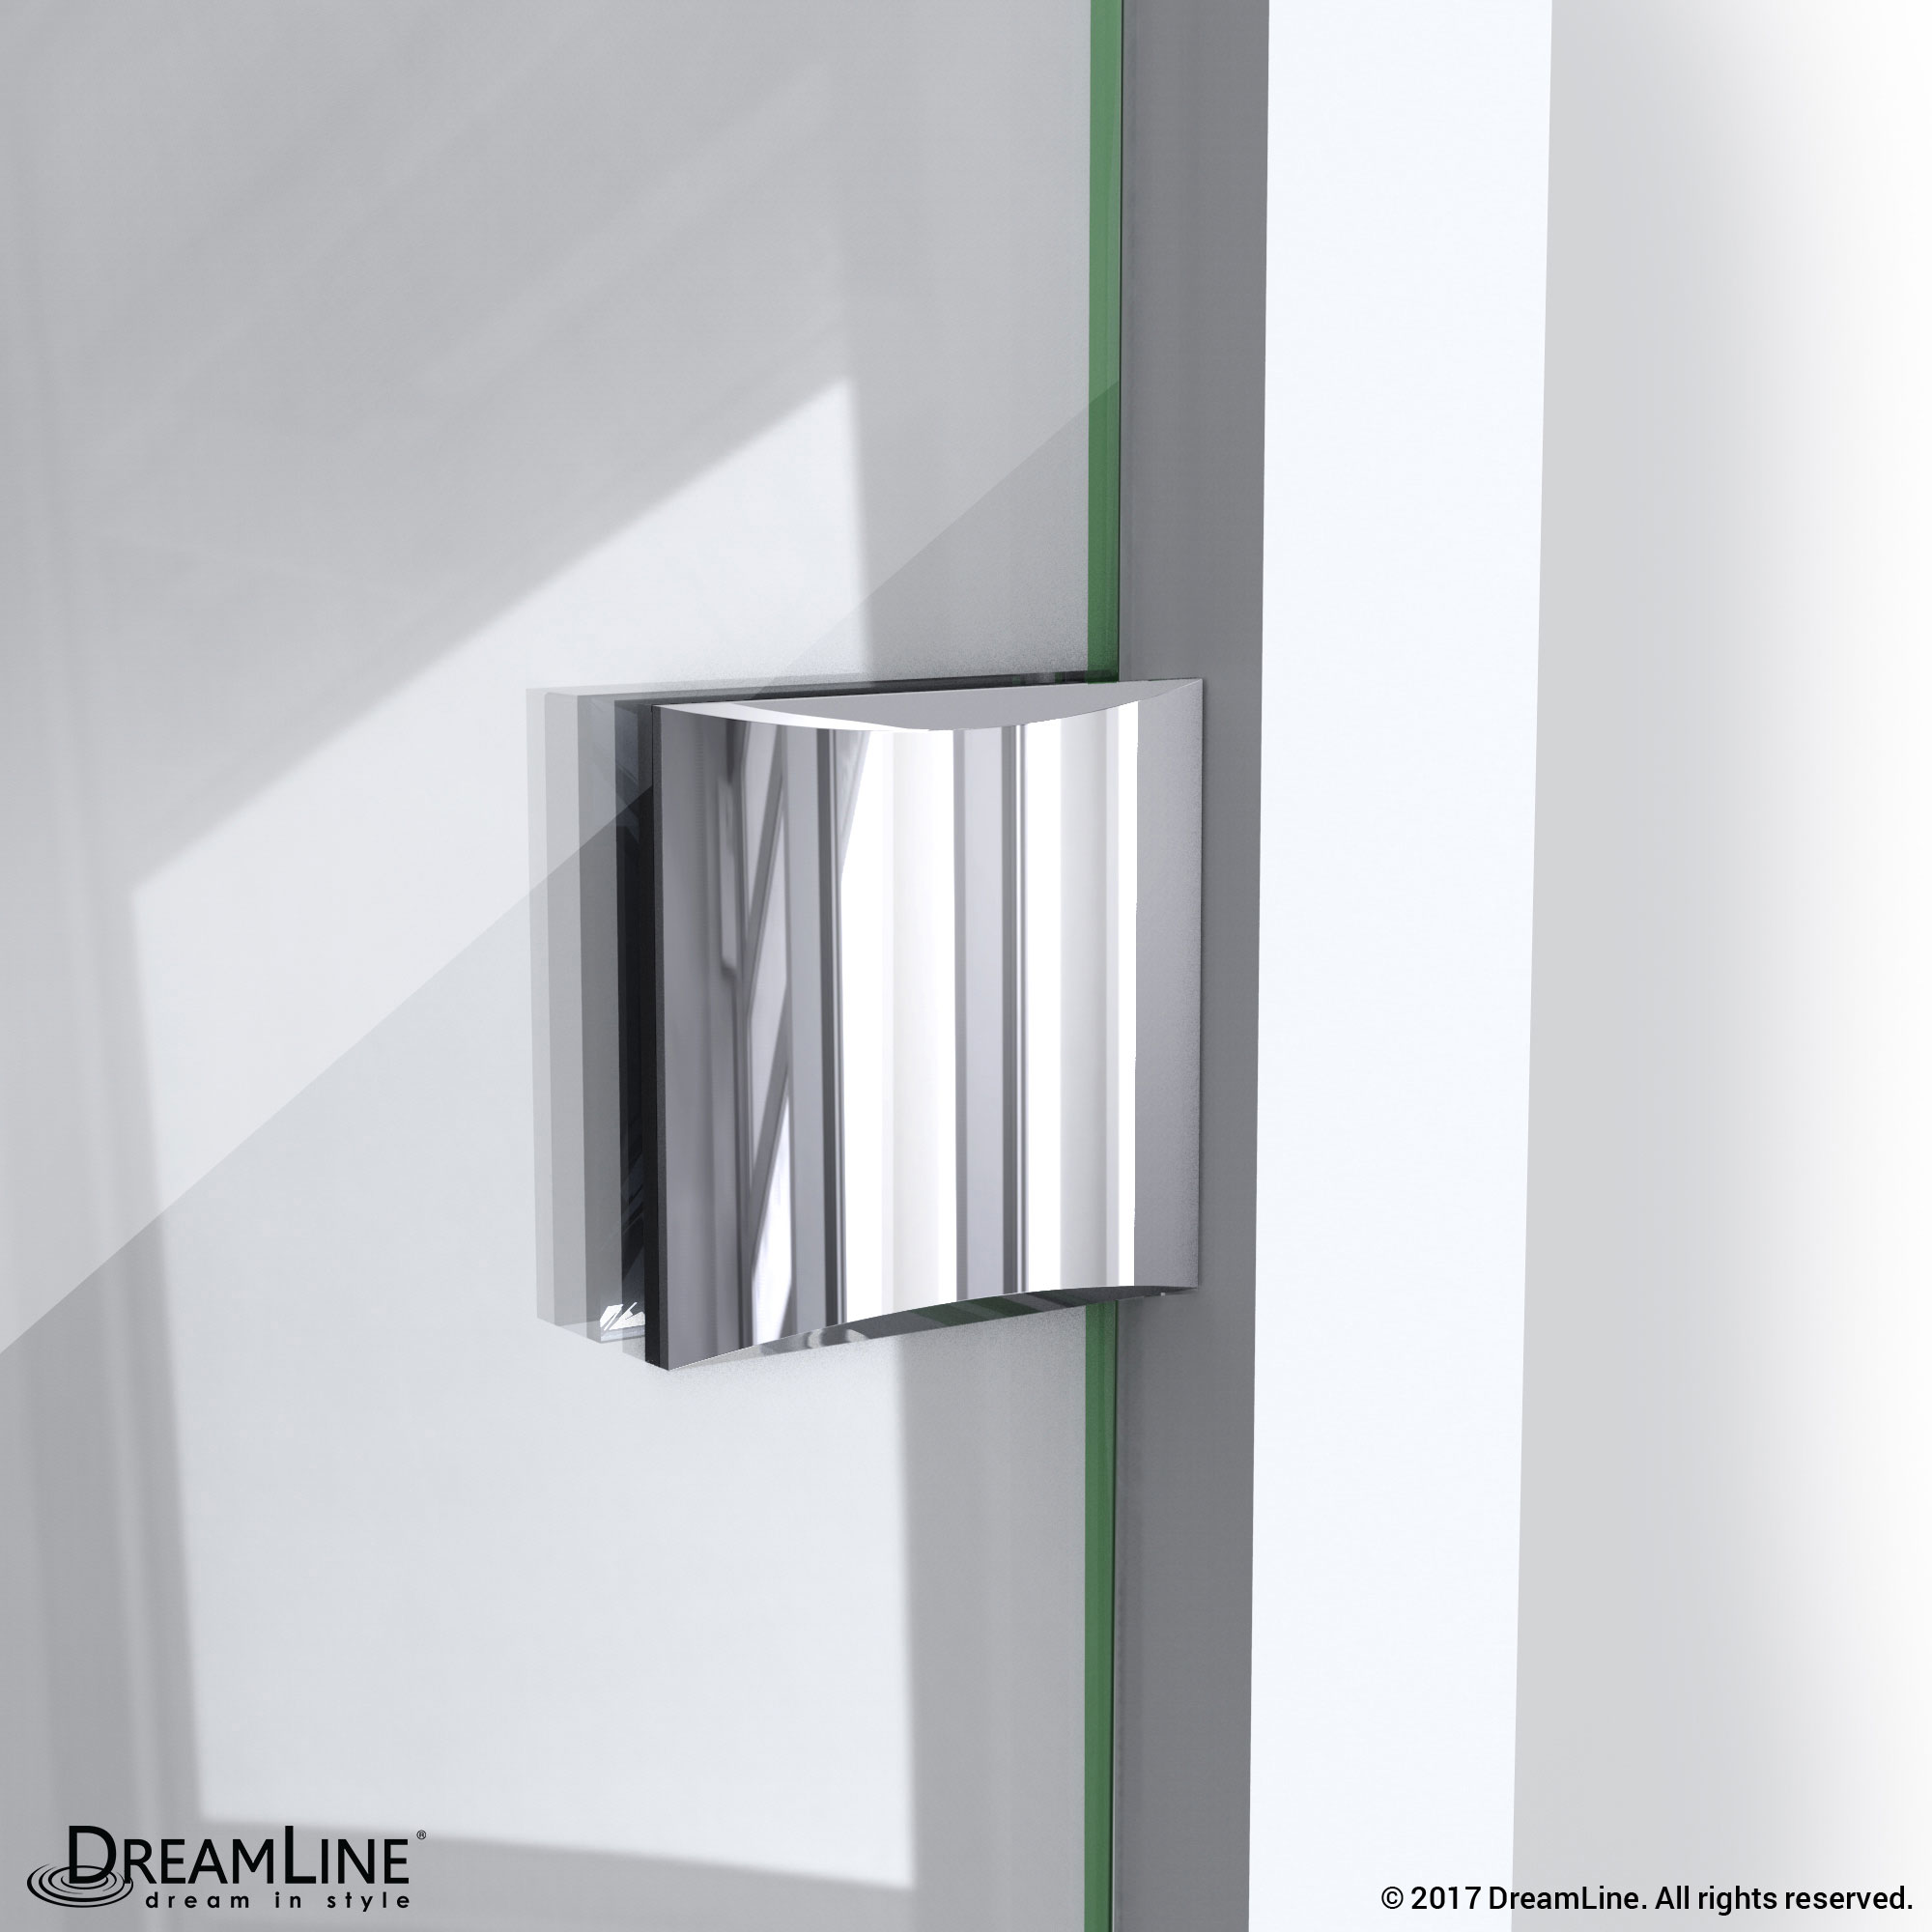 DreamLine Prism Lux 38 in. D x 38 in. W x 74 3/4 in. H Hinged Shower Enclosure in Chrome with Corner Drain Biscuit Base Kit